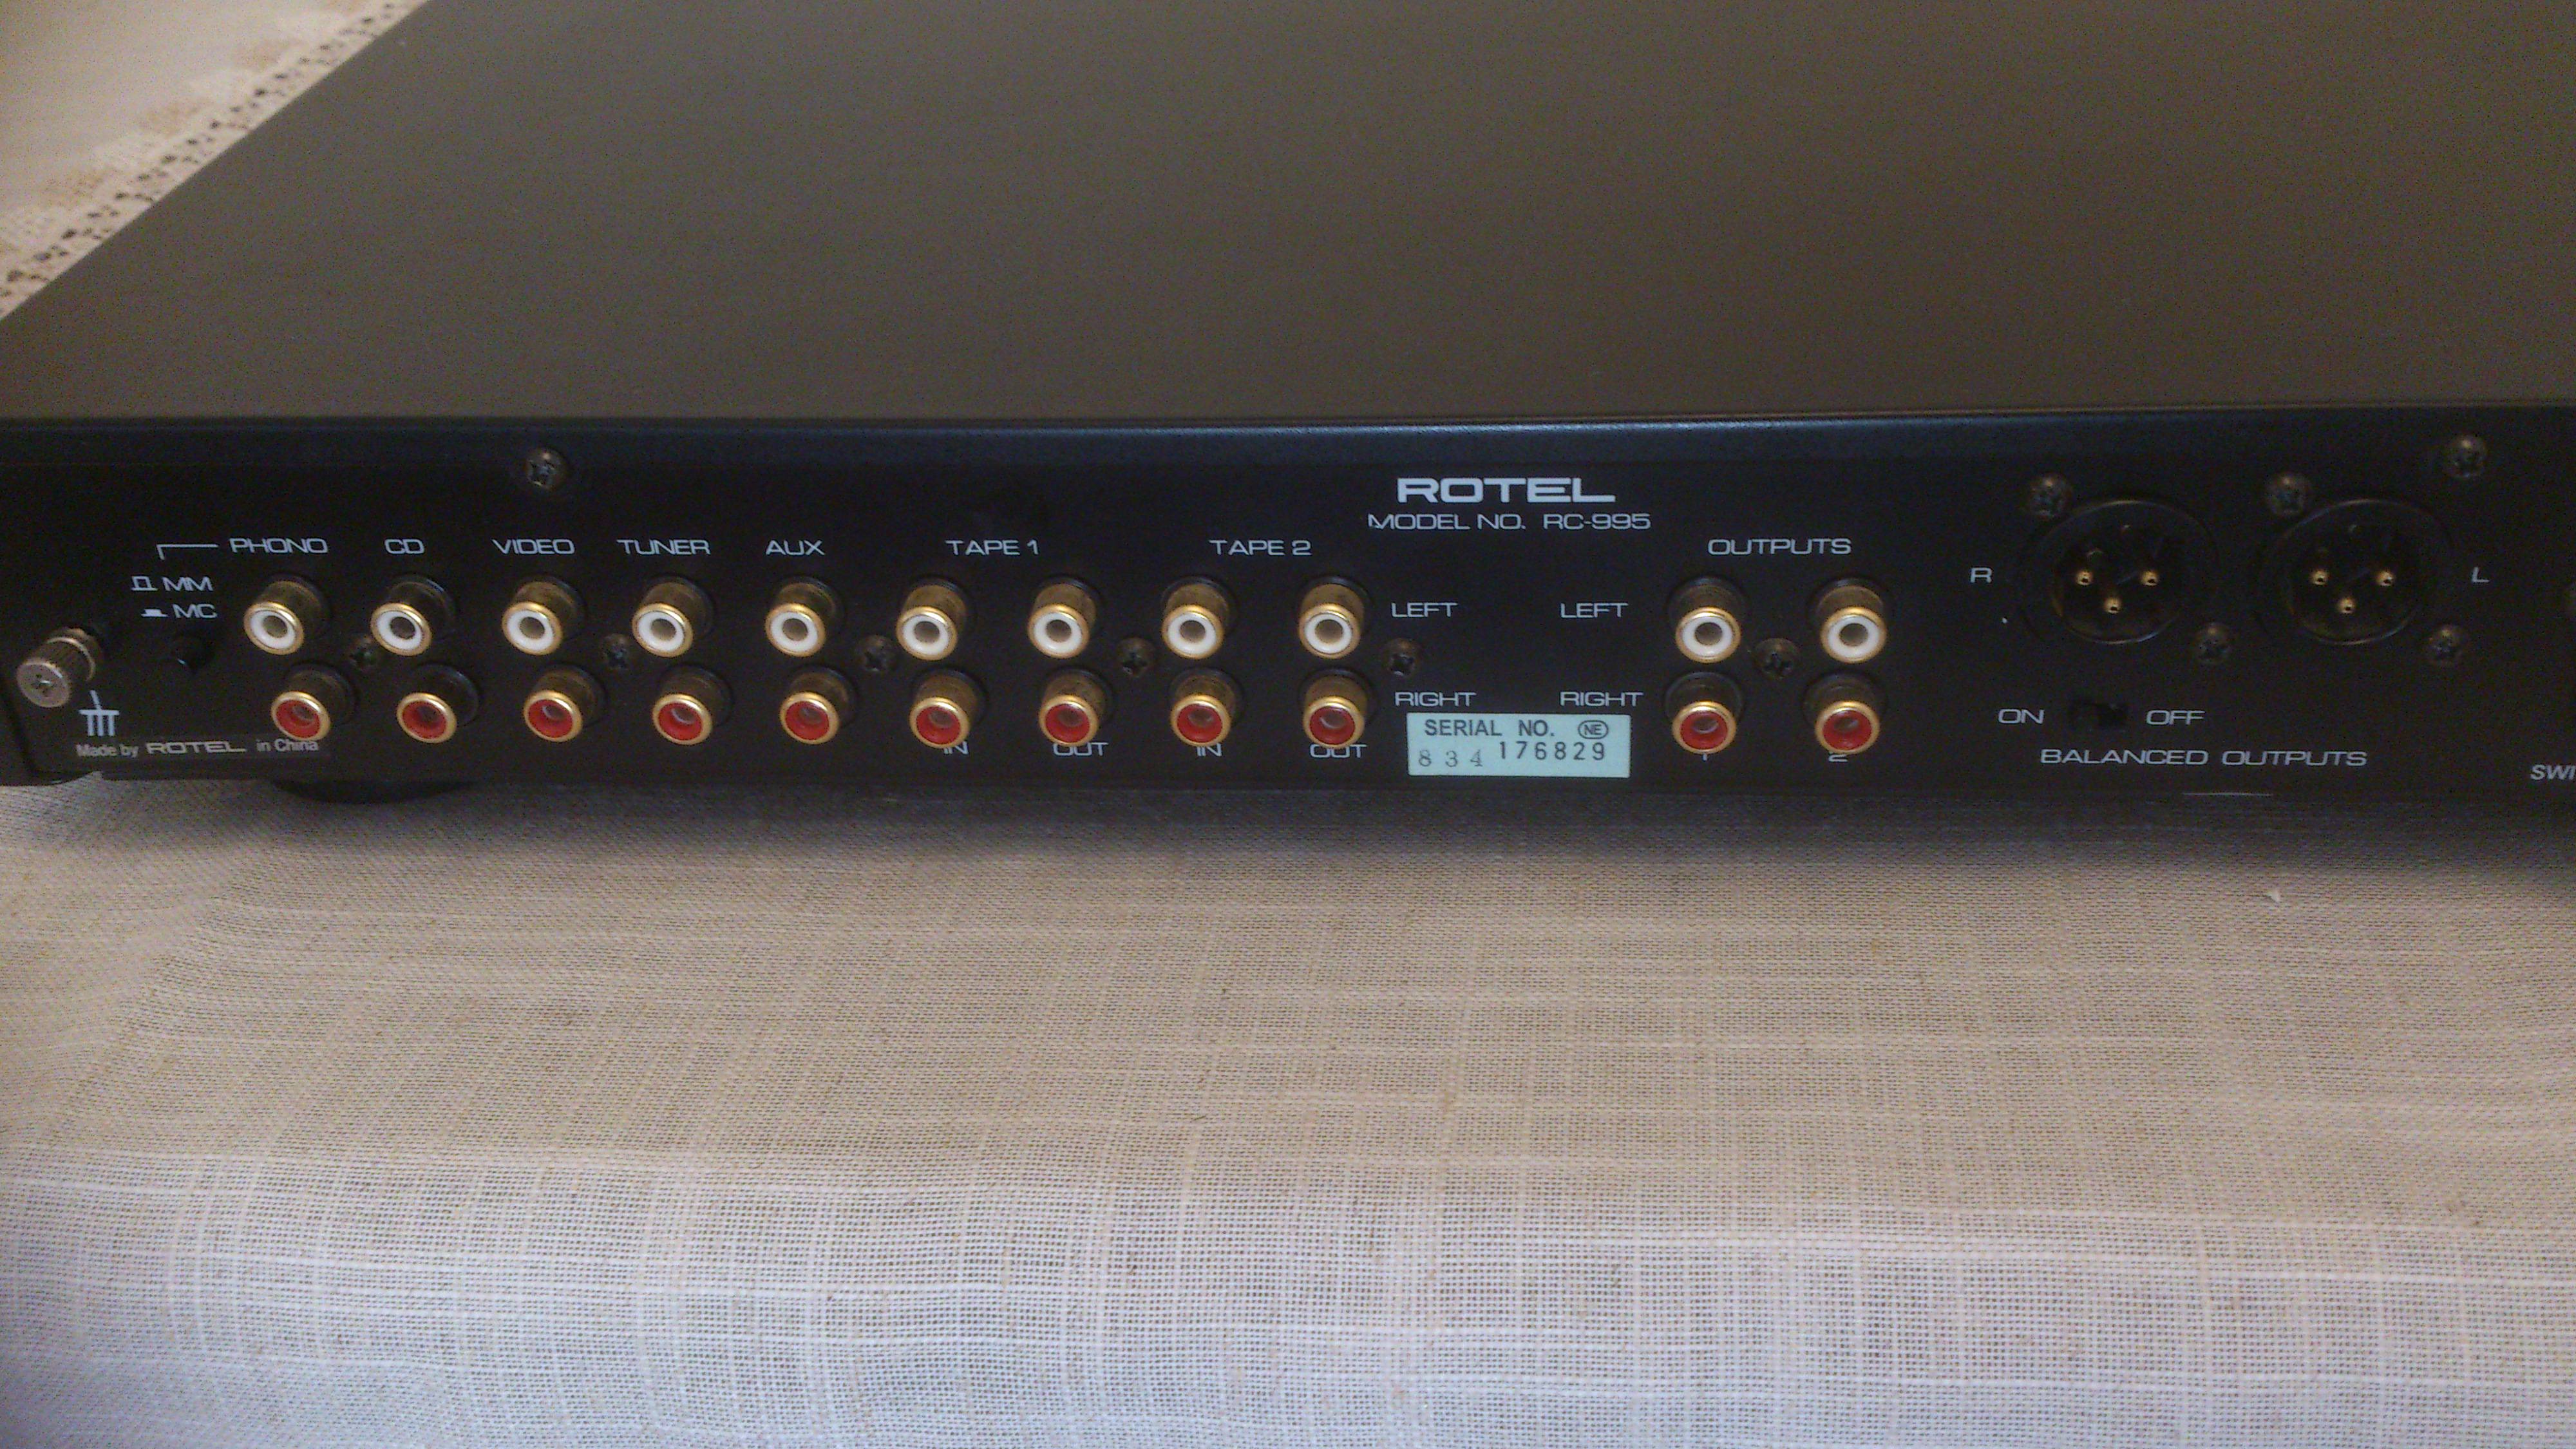 Rotel RC-995